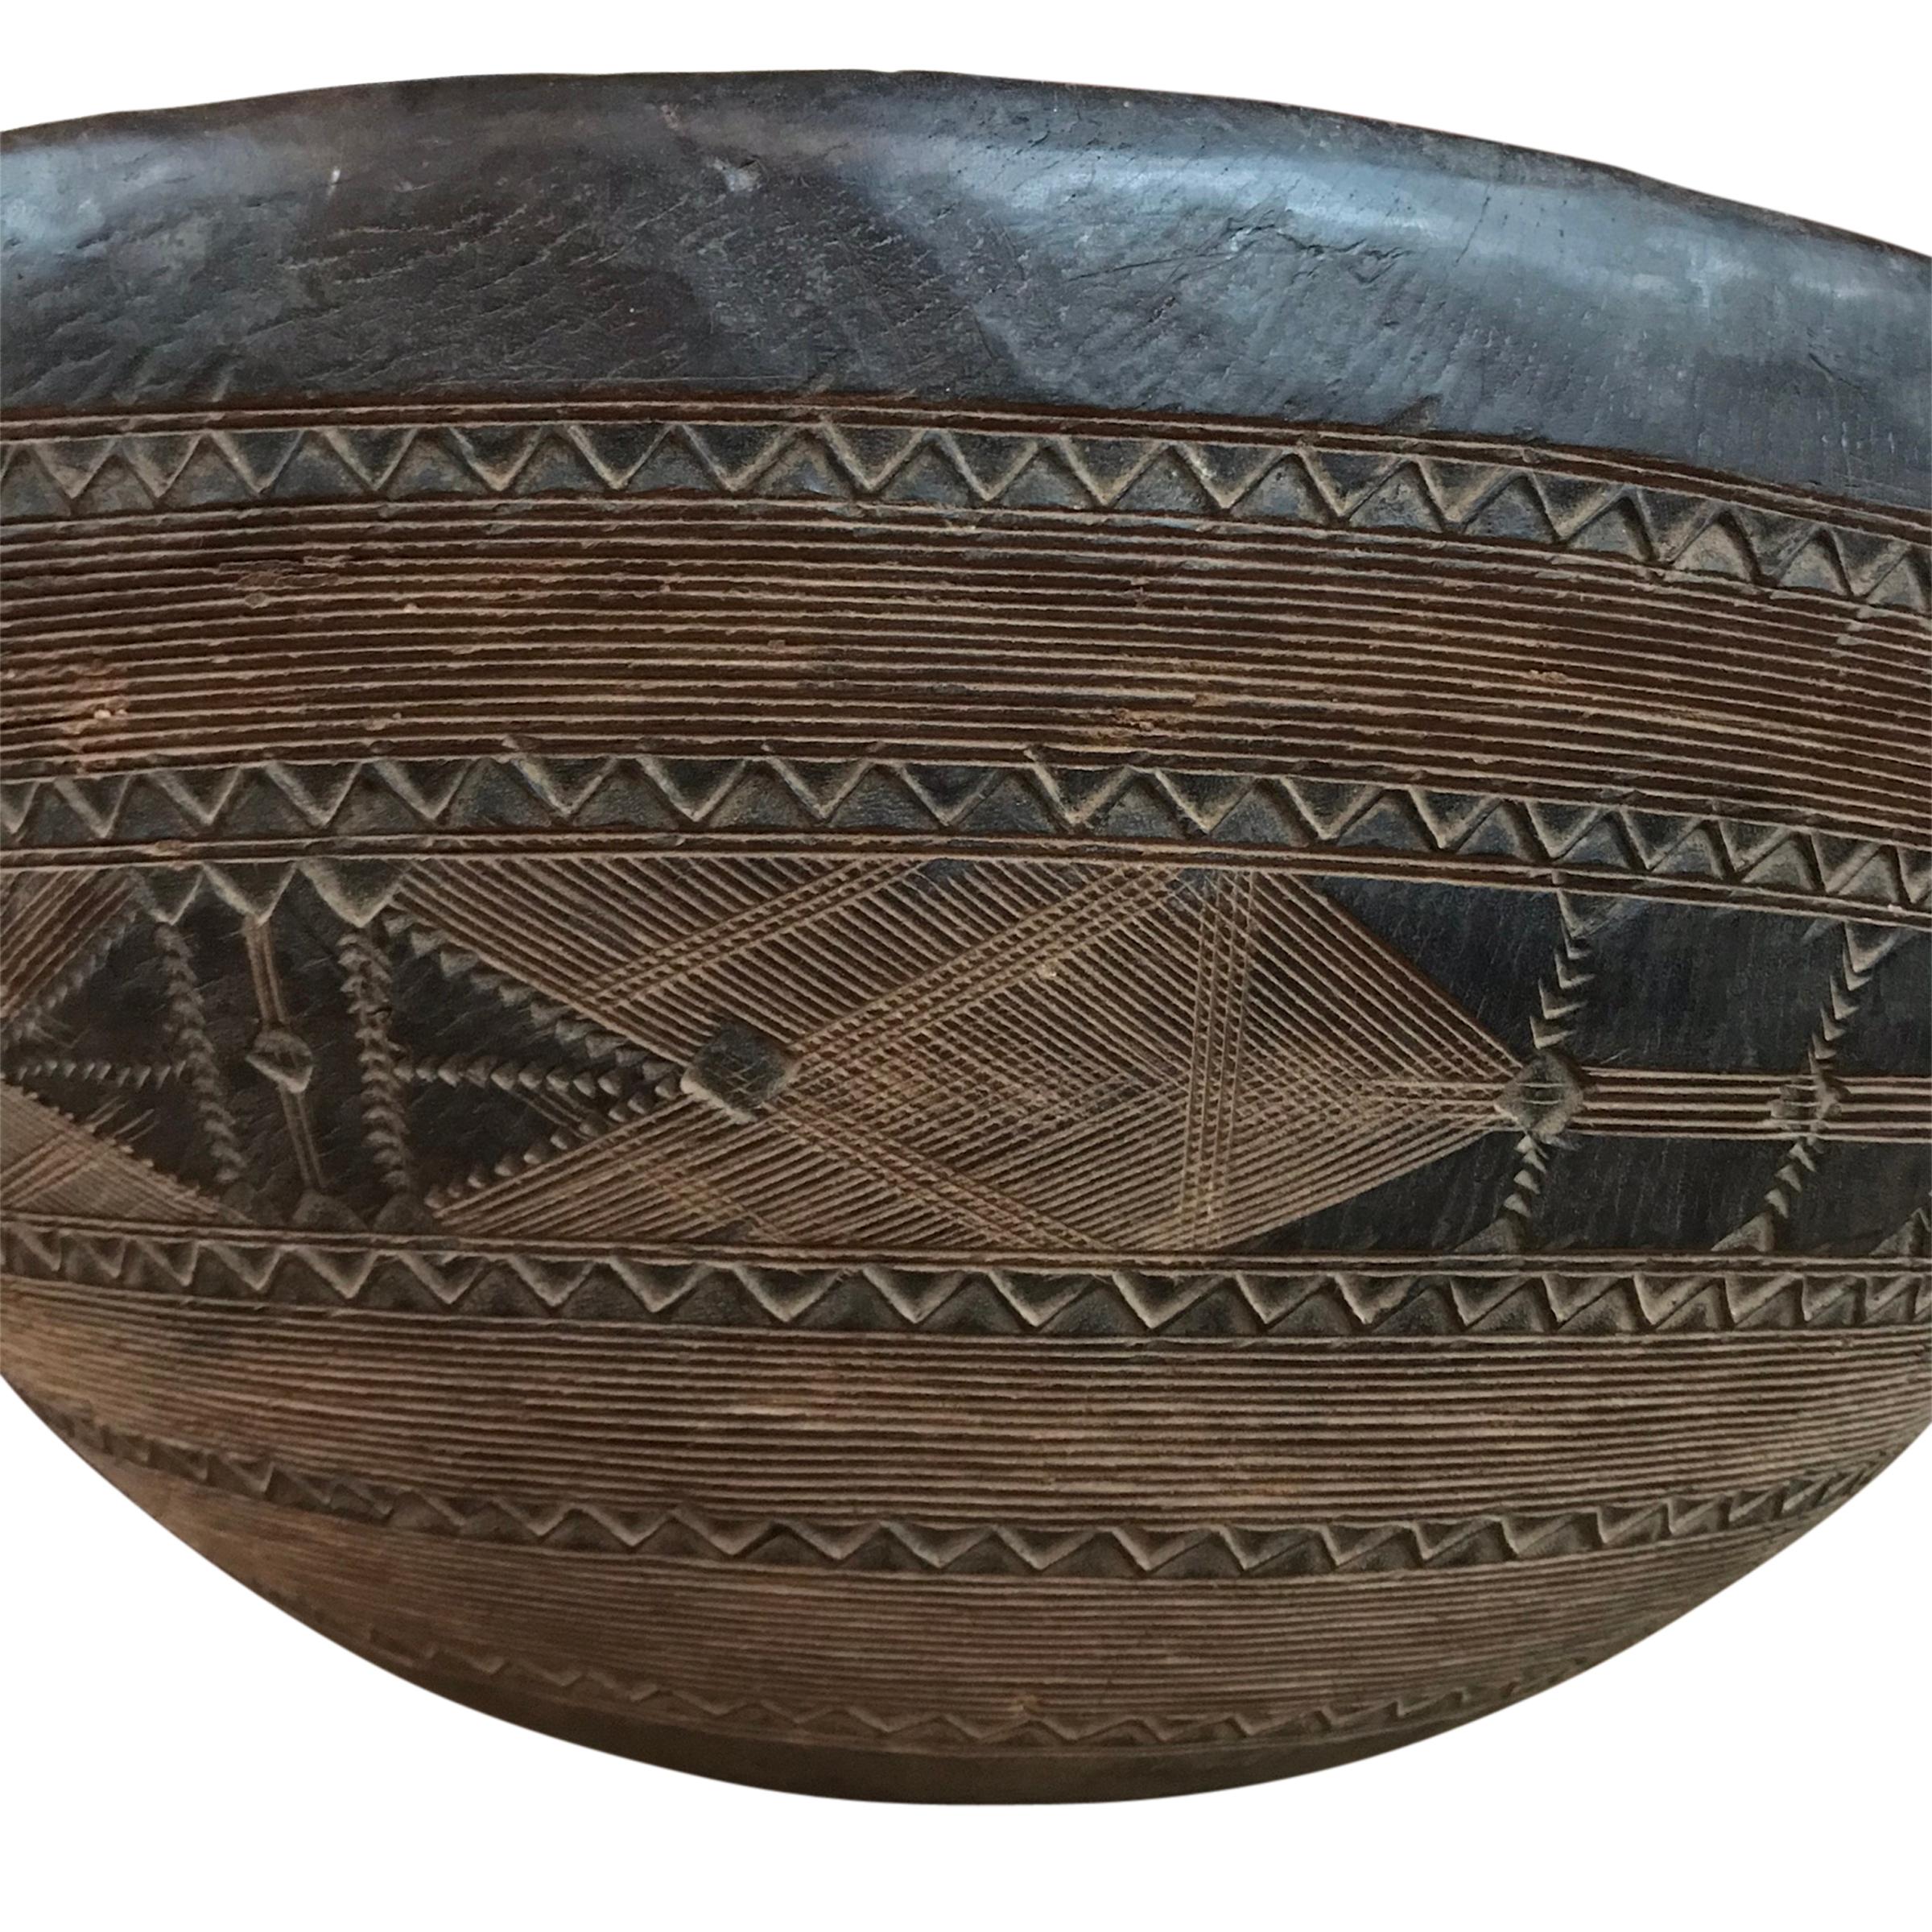 A rather large early 20th century Tuareg bowl carved of a single piece of wood with incised geometric patterns around the exterior. The Touareg are nomadic pastoralists who inhabit the Saharan region of Northern Africa. Because so many of their